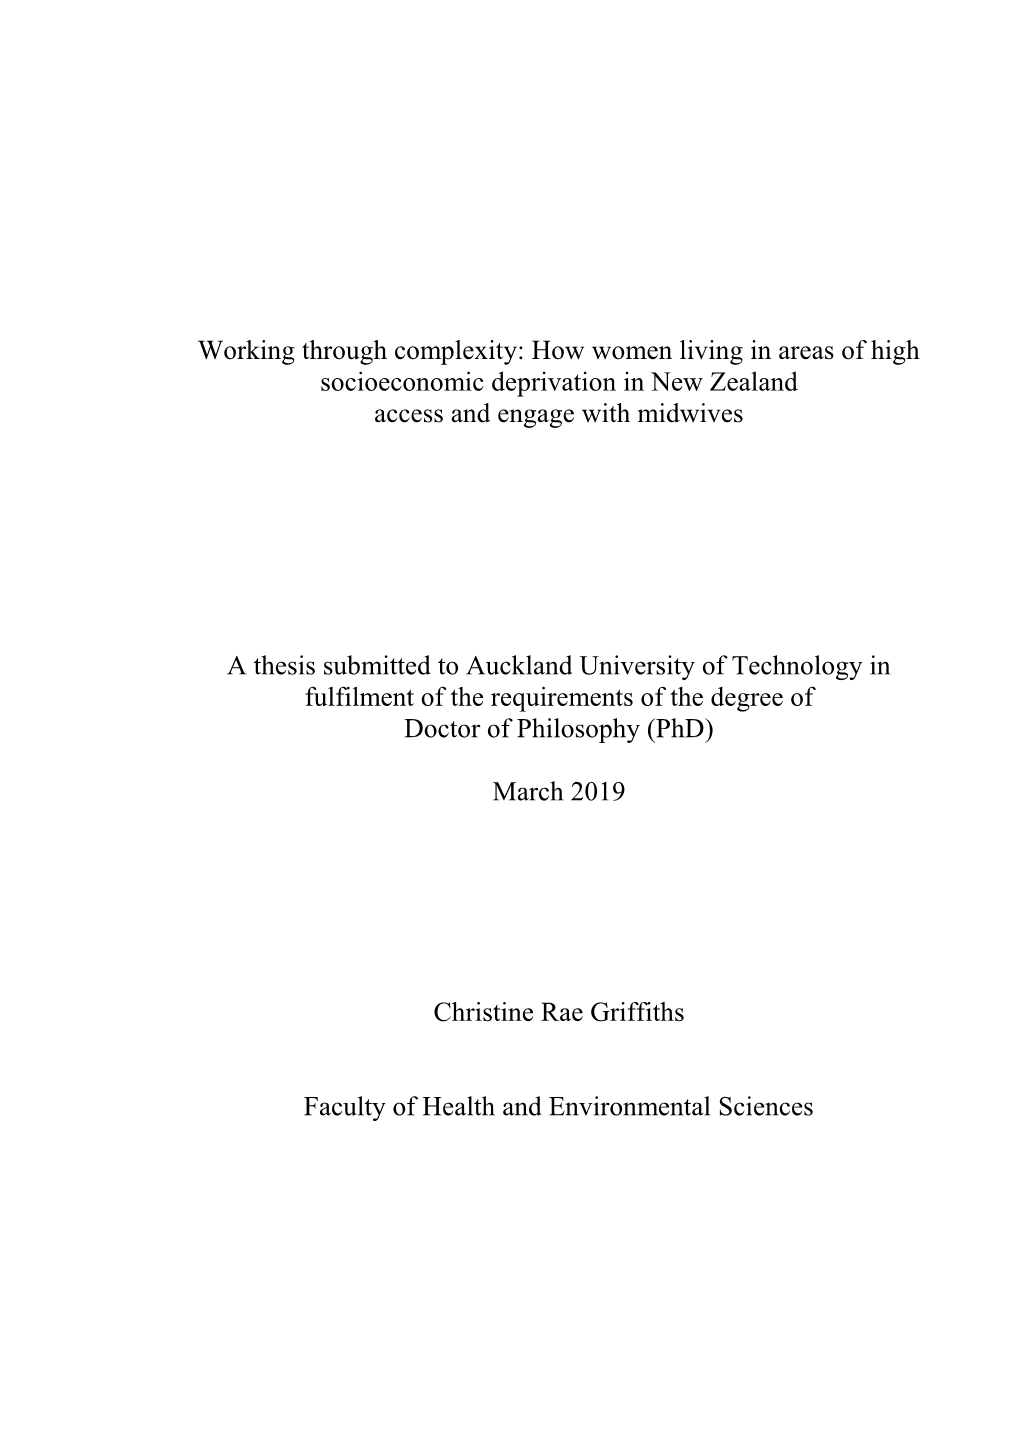 Working Through Complexity: How Women Living in Areas of High Socioeconomic Deprivation in New Zealand Access and Engage with Midwives